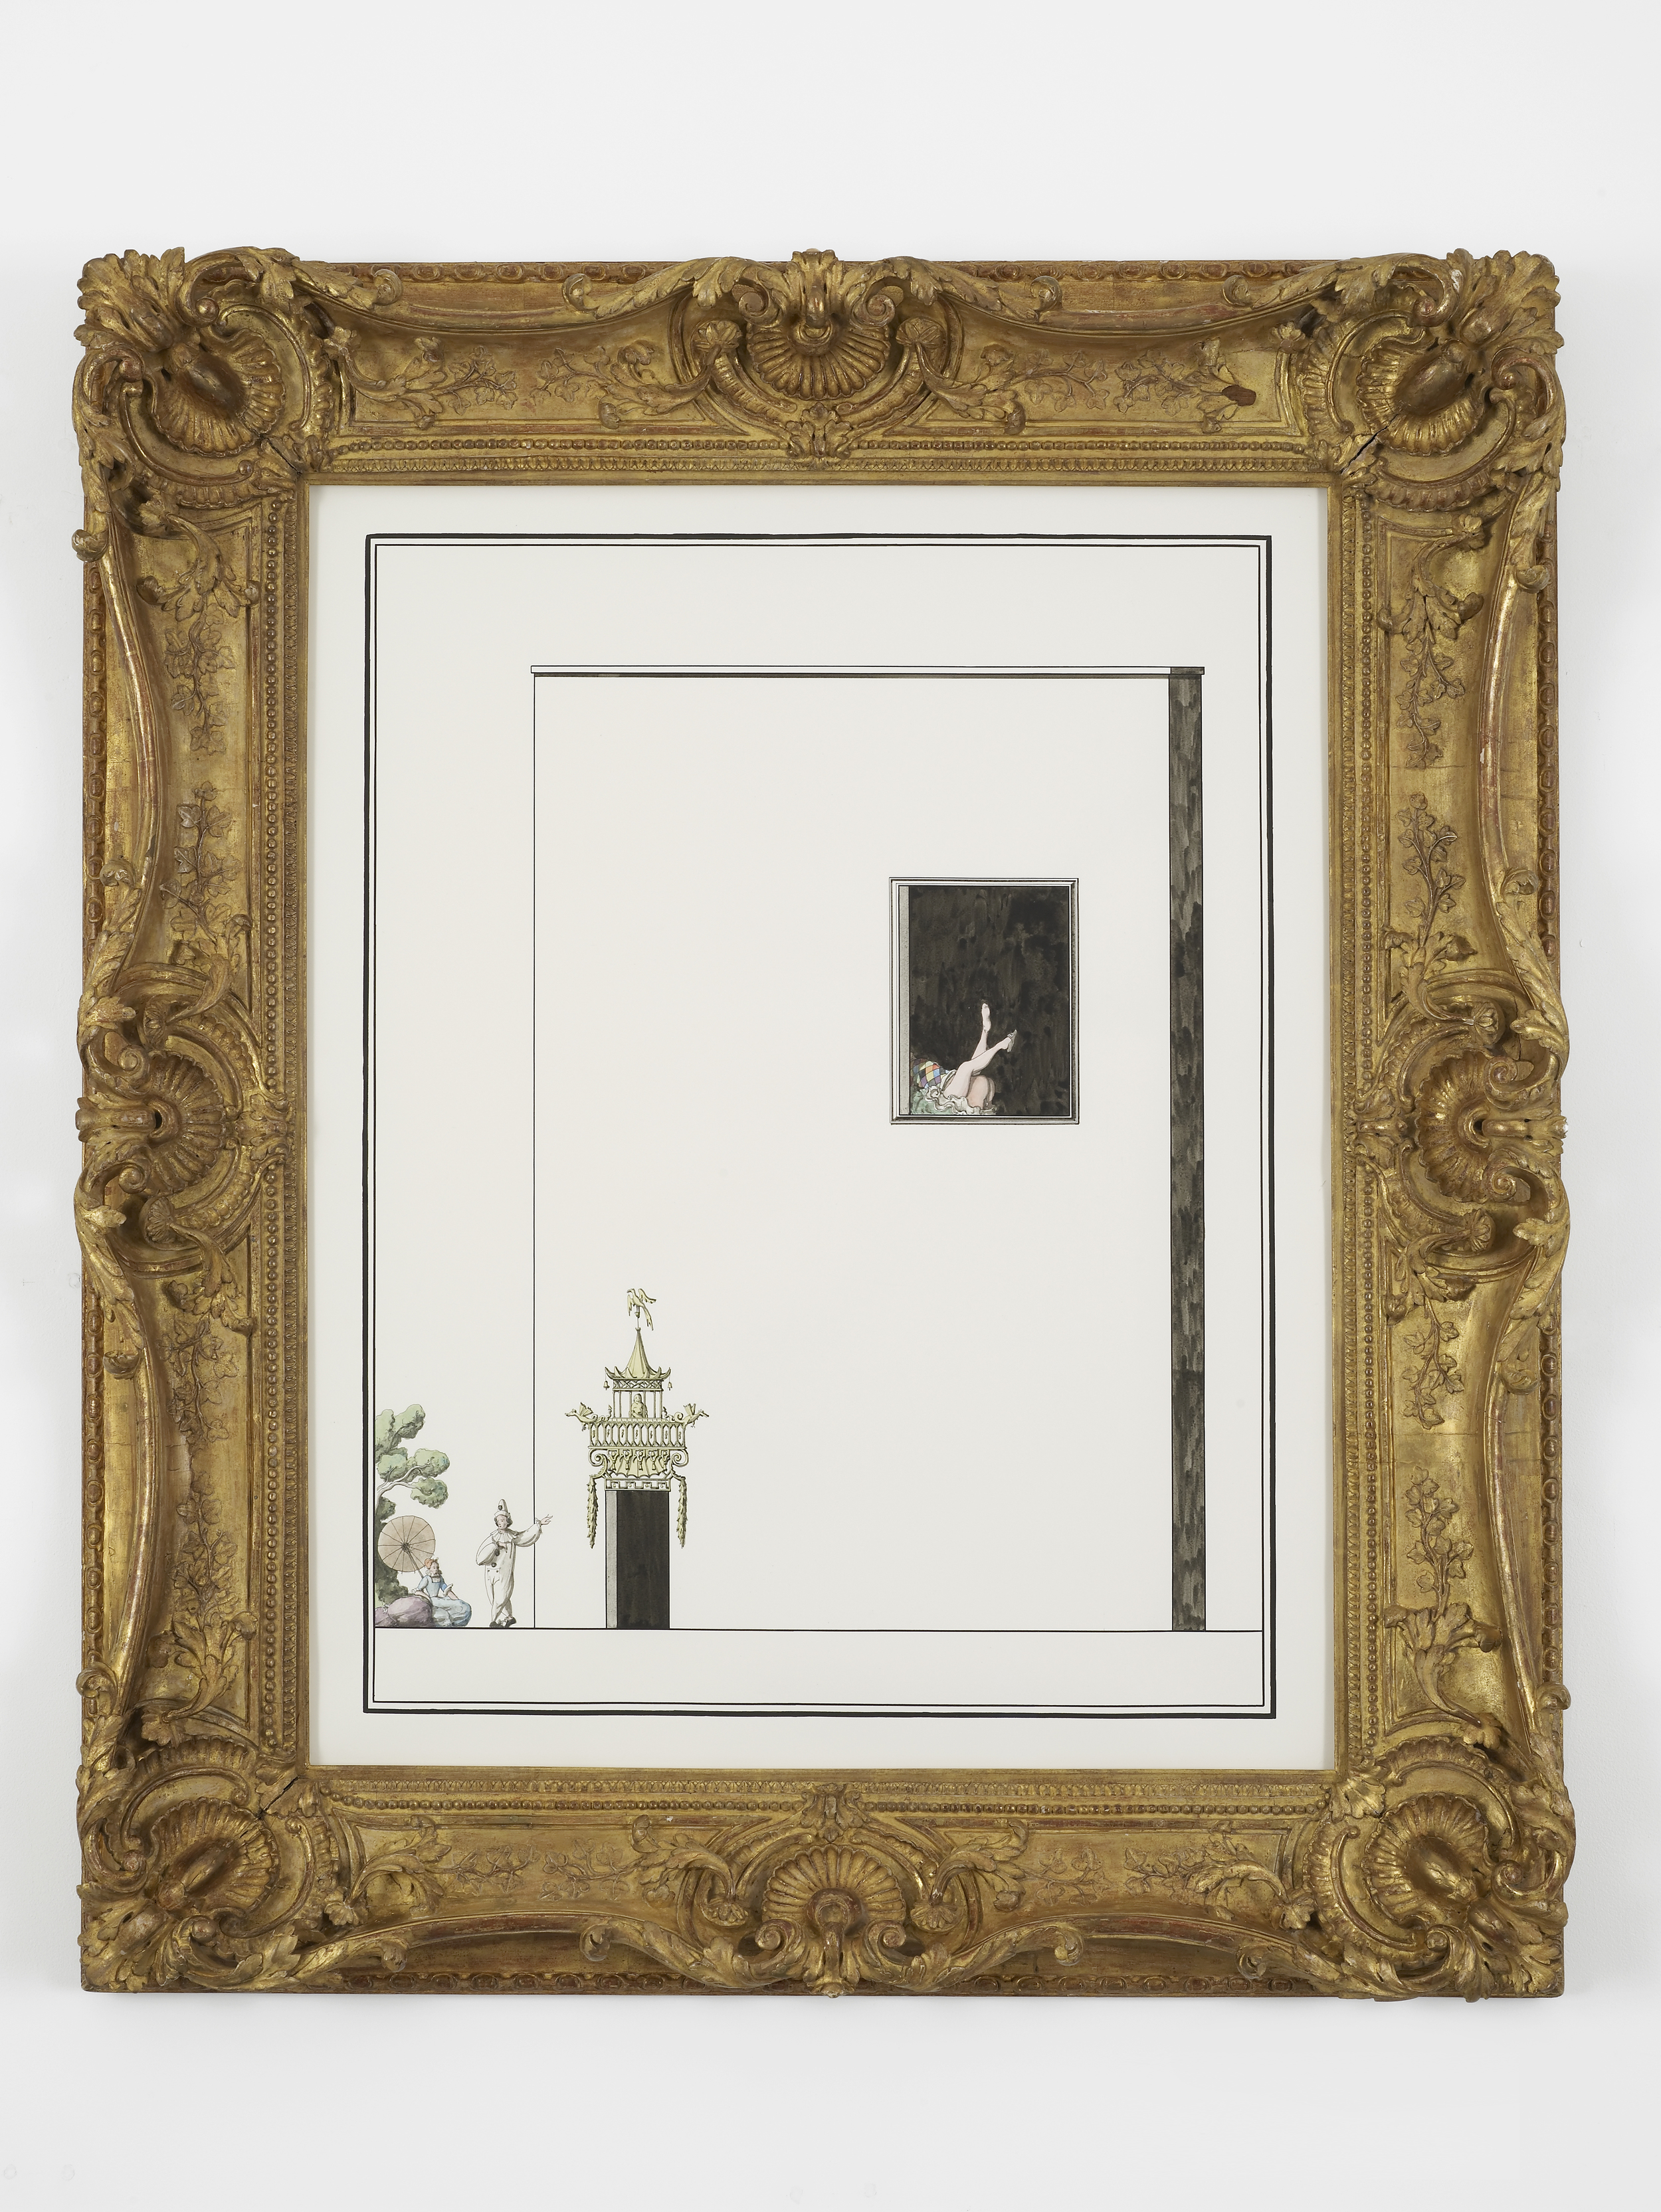     Scene from the Commedia: Pierrot bores Columbine with a detailed description of an elaborate doorframe. Meanwhile, Harlequin has sex with a servant upstairs 2014 Ink and watercolour on paper in artist’s frame 120.5 x 102 x 10 cm / 47.4 x 40.1 x 3